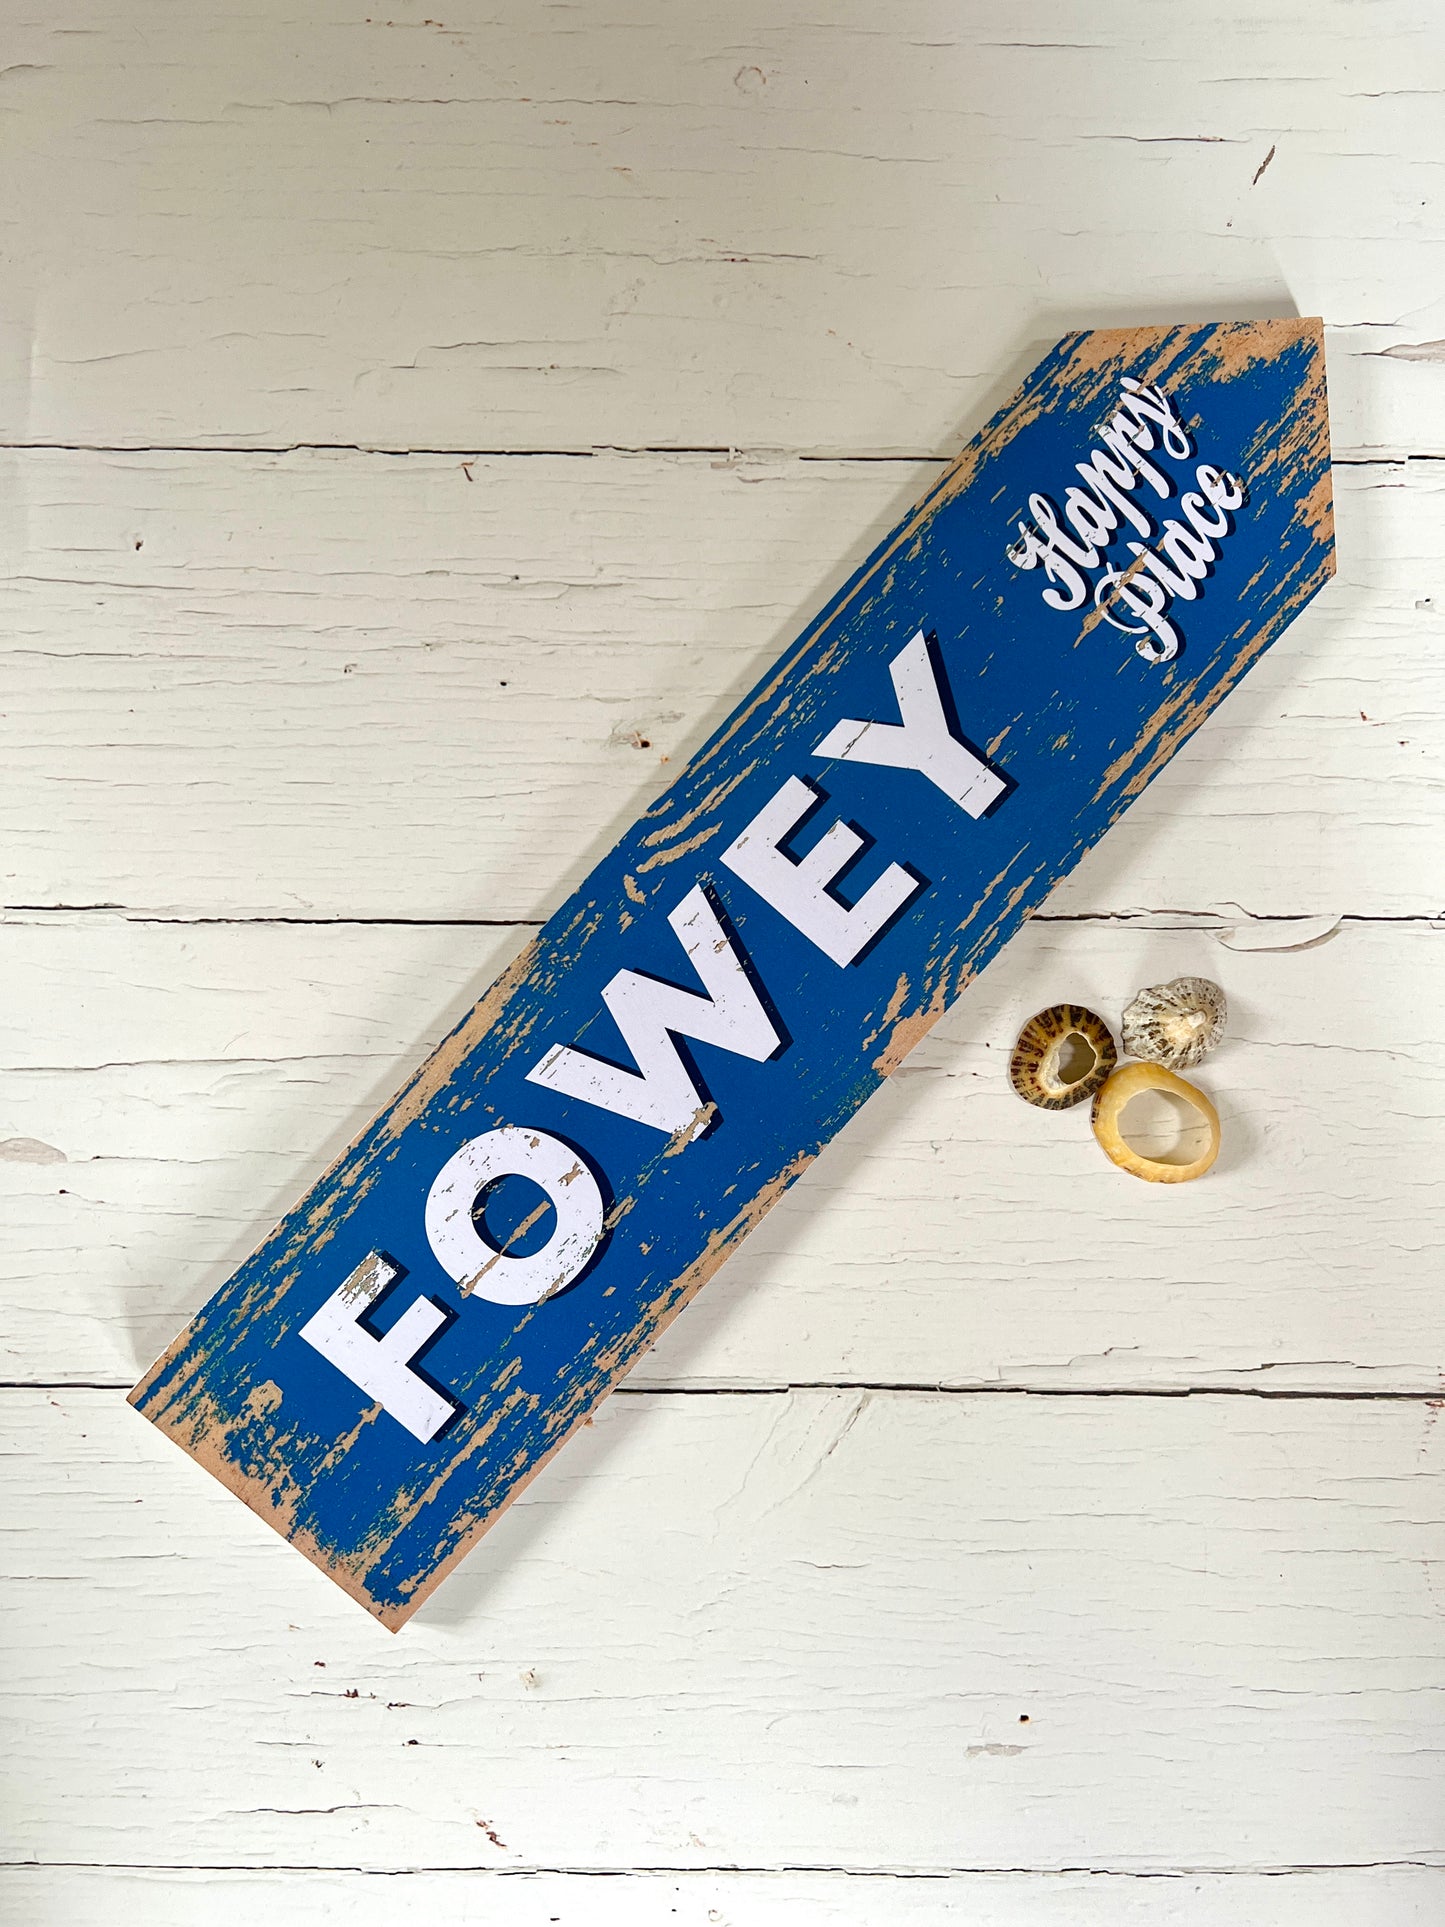 Fowey Happy Place directional arrow sign in blue